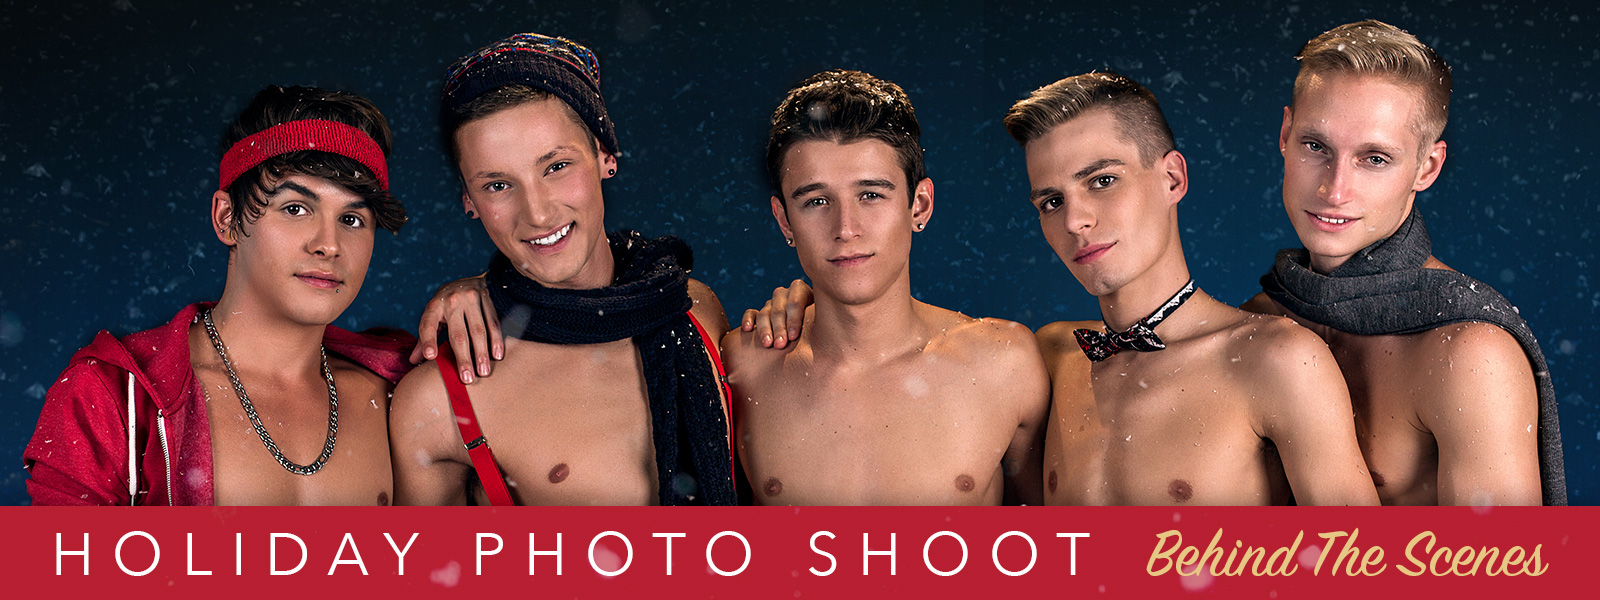 Casey Tanner & beautiful twinks giving erotic pose for holiday photo shoot